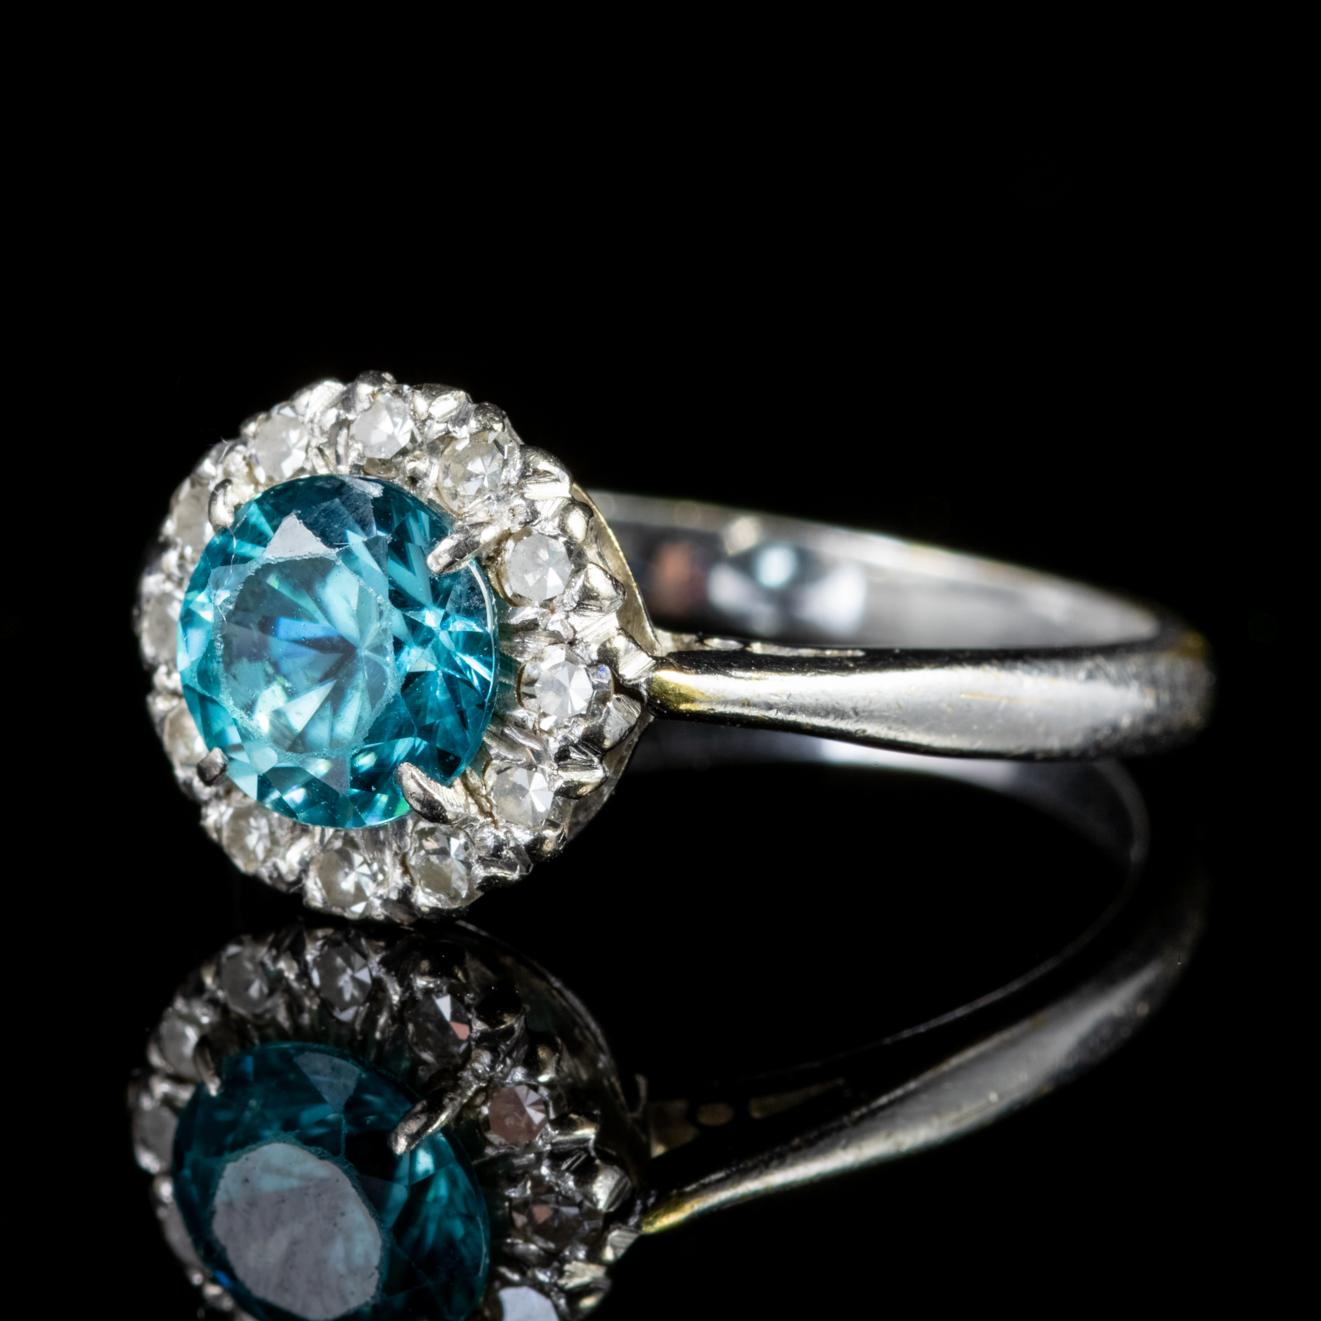 A fabulous antique Edwardian cluster ring adorned with a 0.80ct Blue Zircon in the centre haloed by sparkling Diamonds, approx. 0.45ct in total. 

Blue Zircon is a lovely shade of teal/ blue and was once said to bring prosperity and wisdom to its